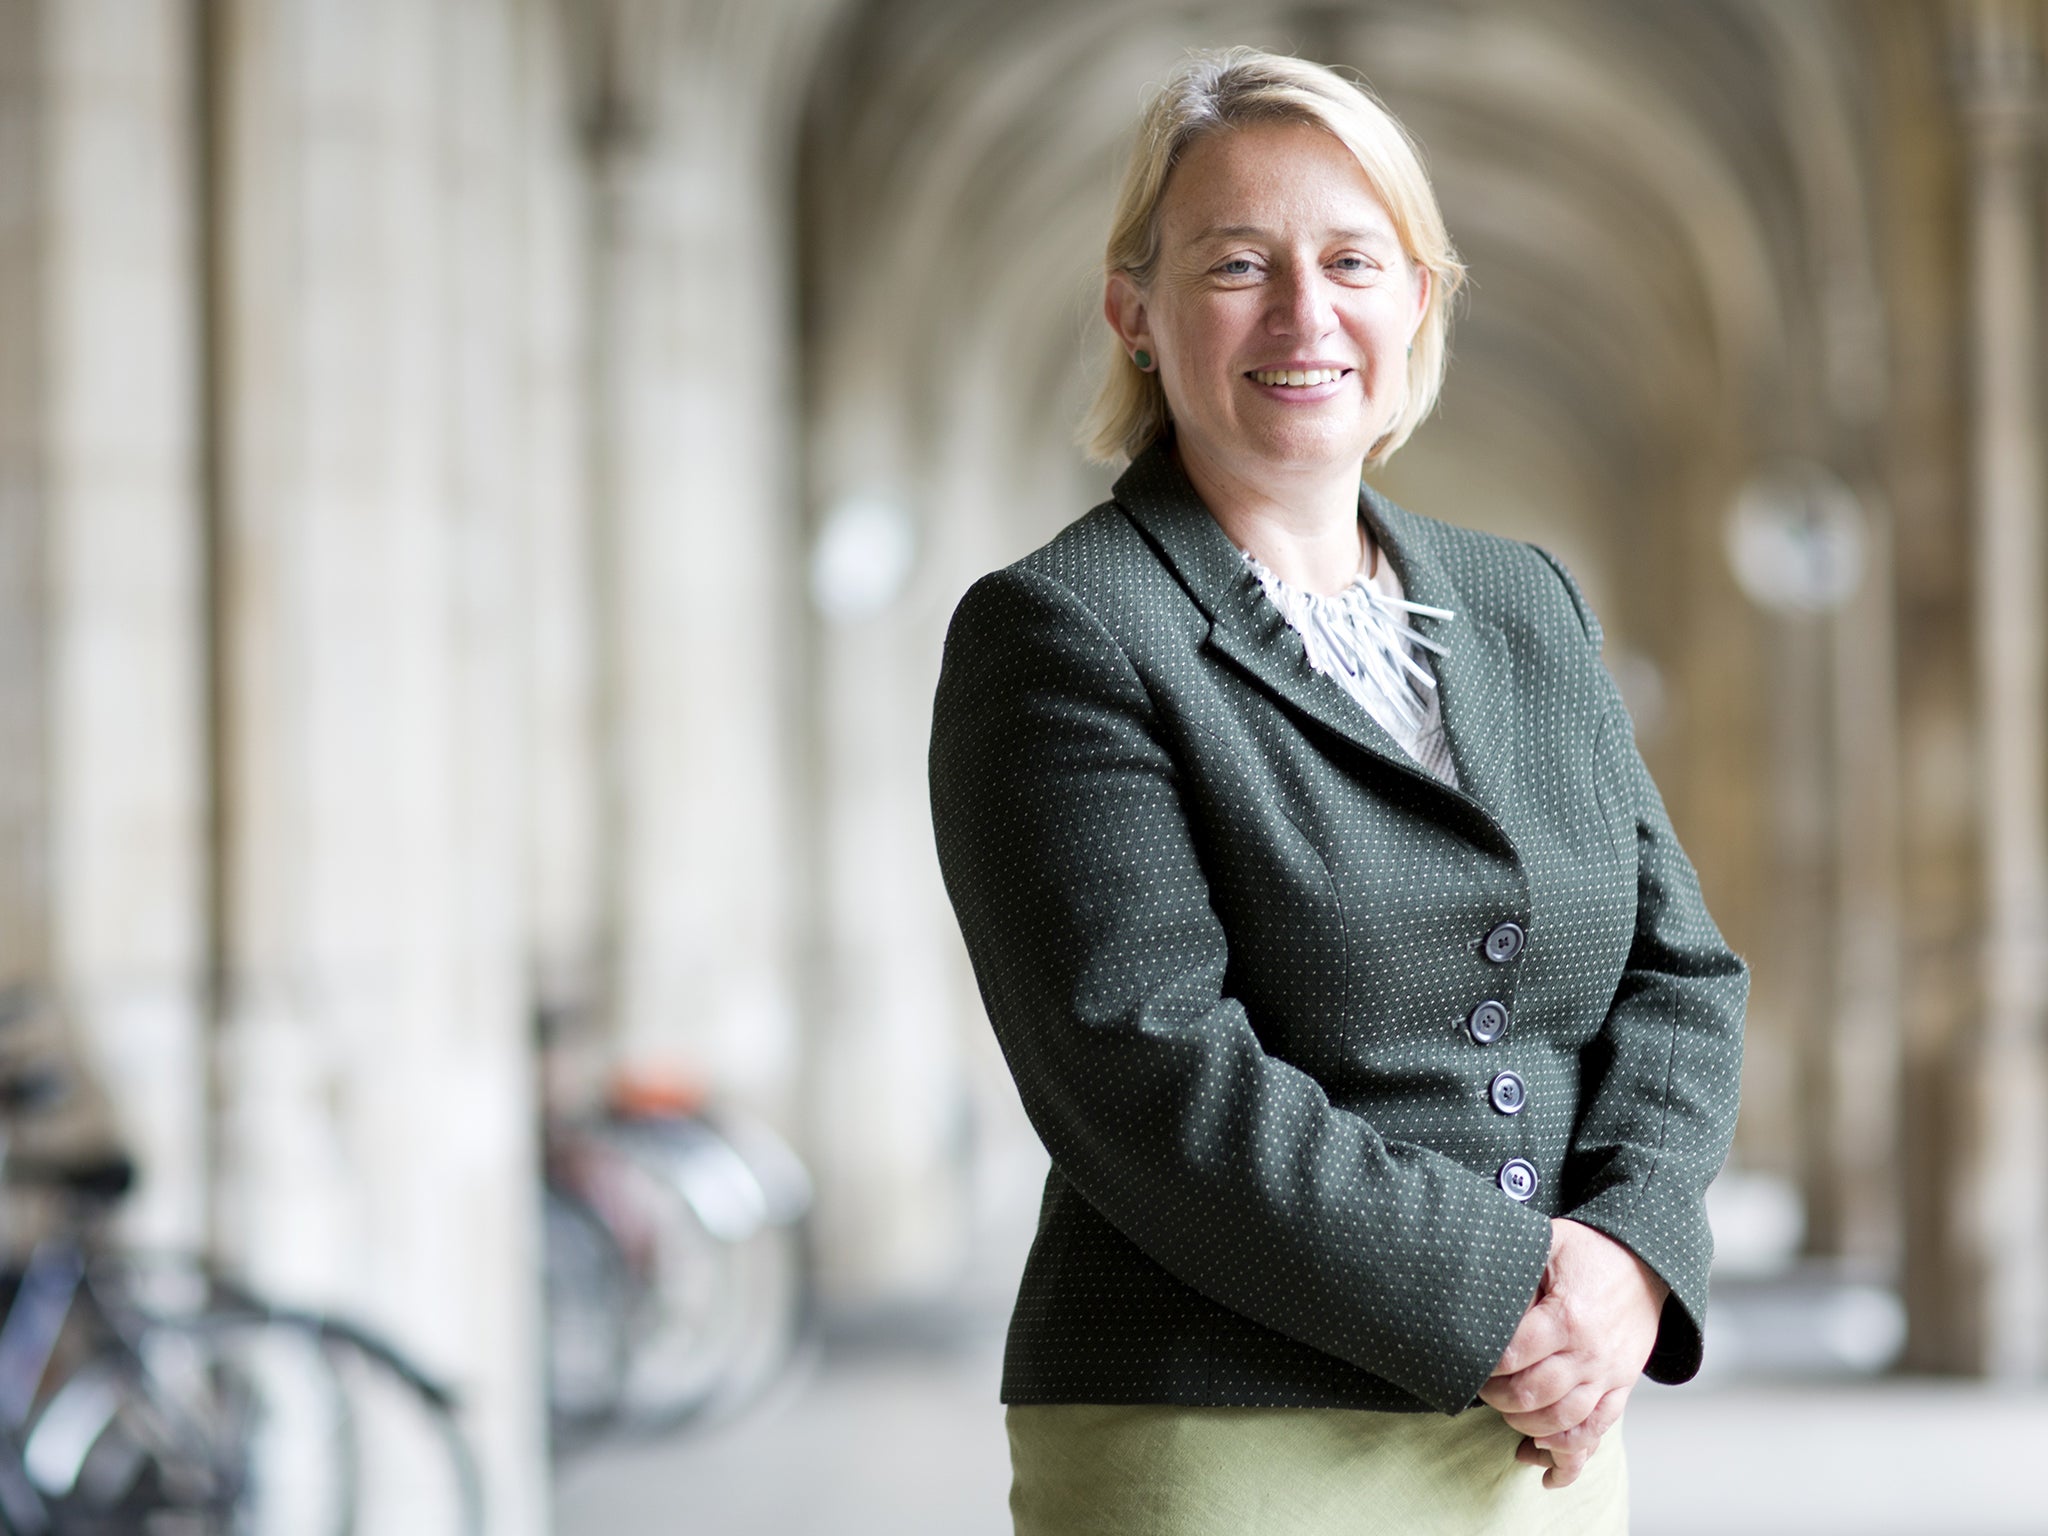 A petition calling for Natalie Bennett, the leader of the Green Party, to be included has been signed by nearly 200,000 people